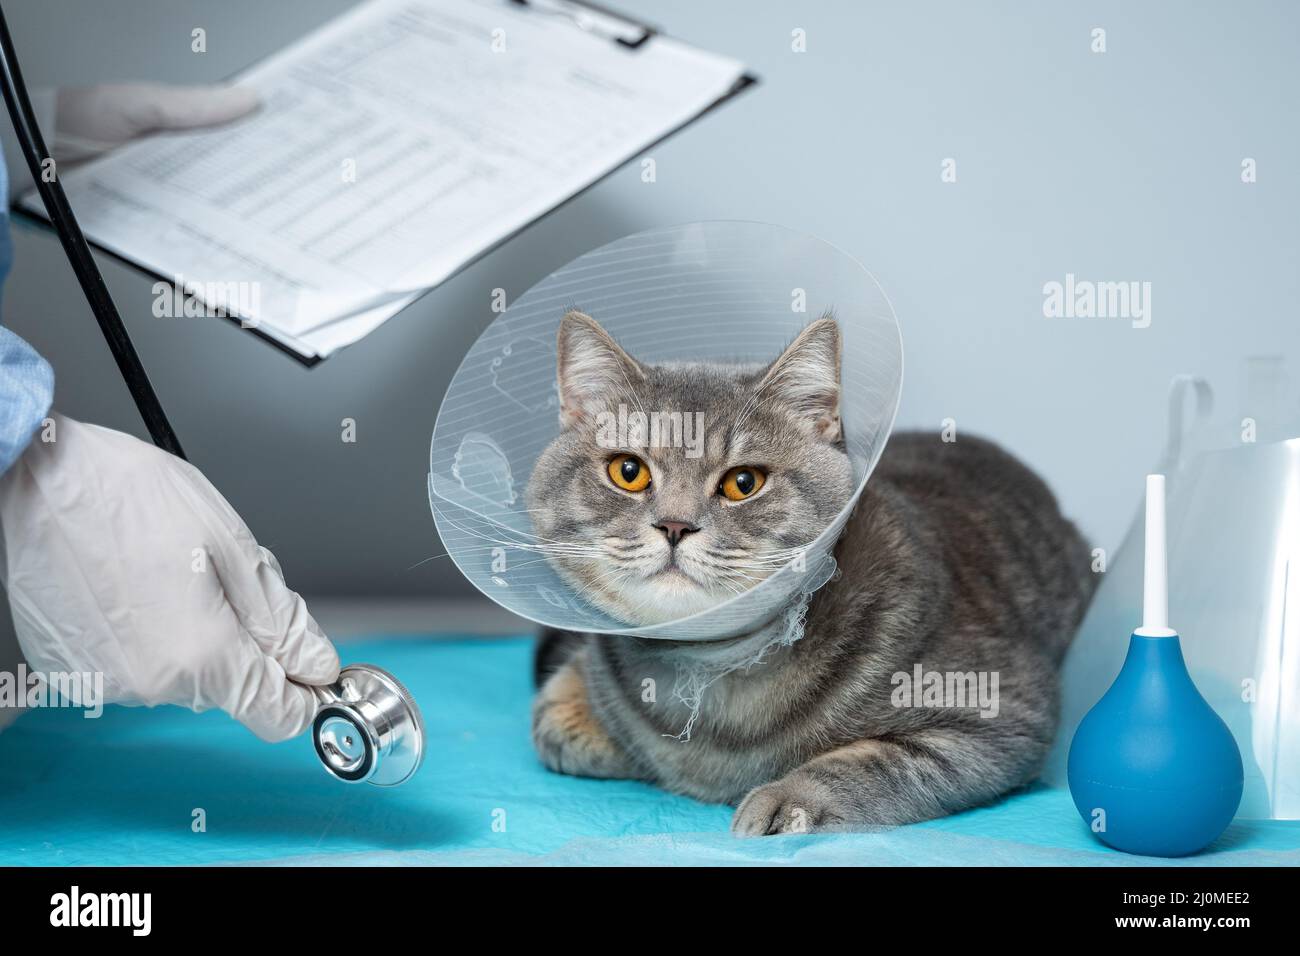 Close up of cat with an Elizabethan veterinary collar on veterinary examination table. Woman doctor in medical uniform with whit Stock Photo